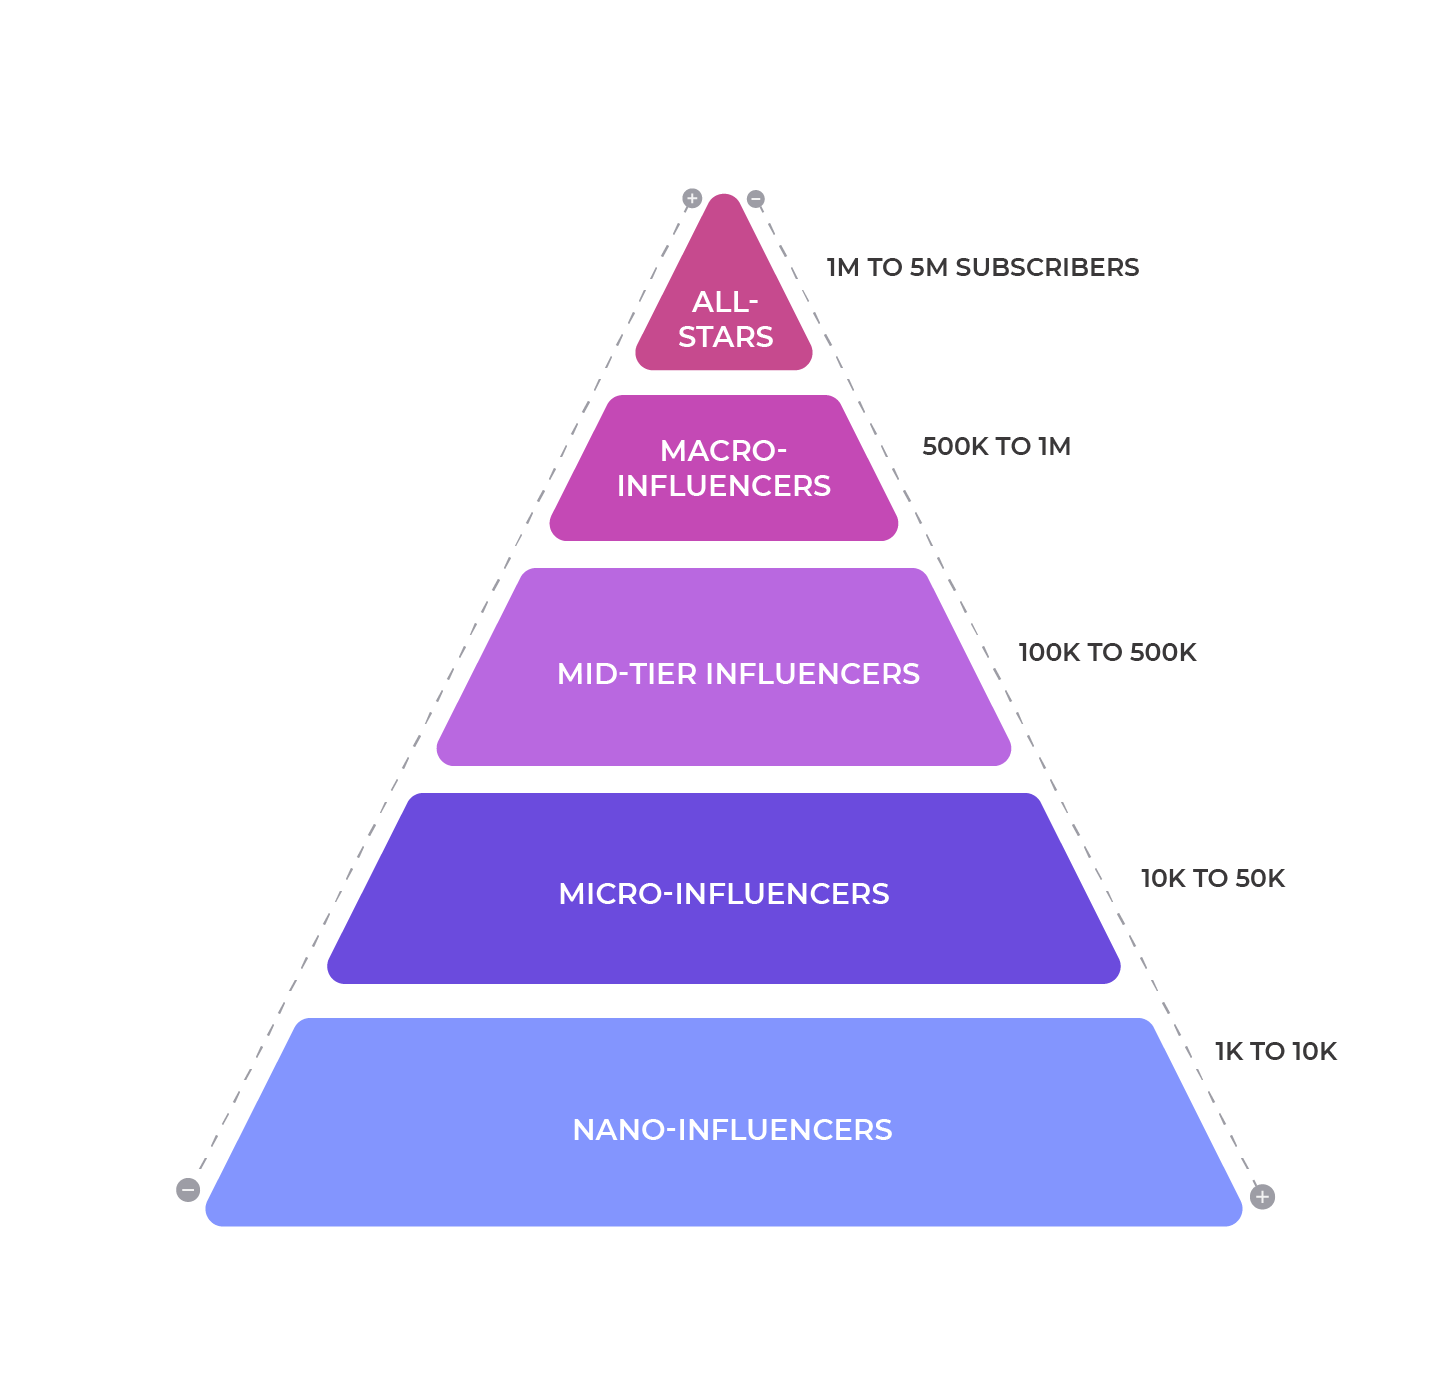 The five main categories of influencers according to the size of their audience